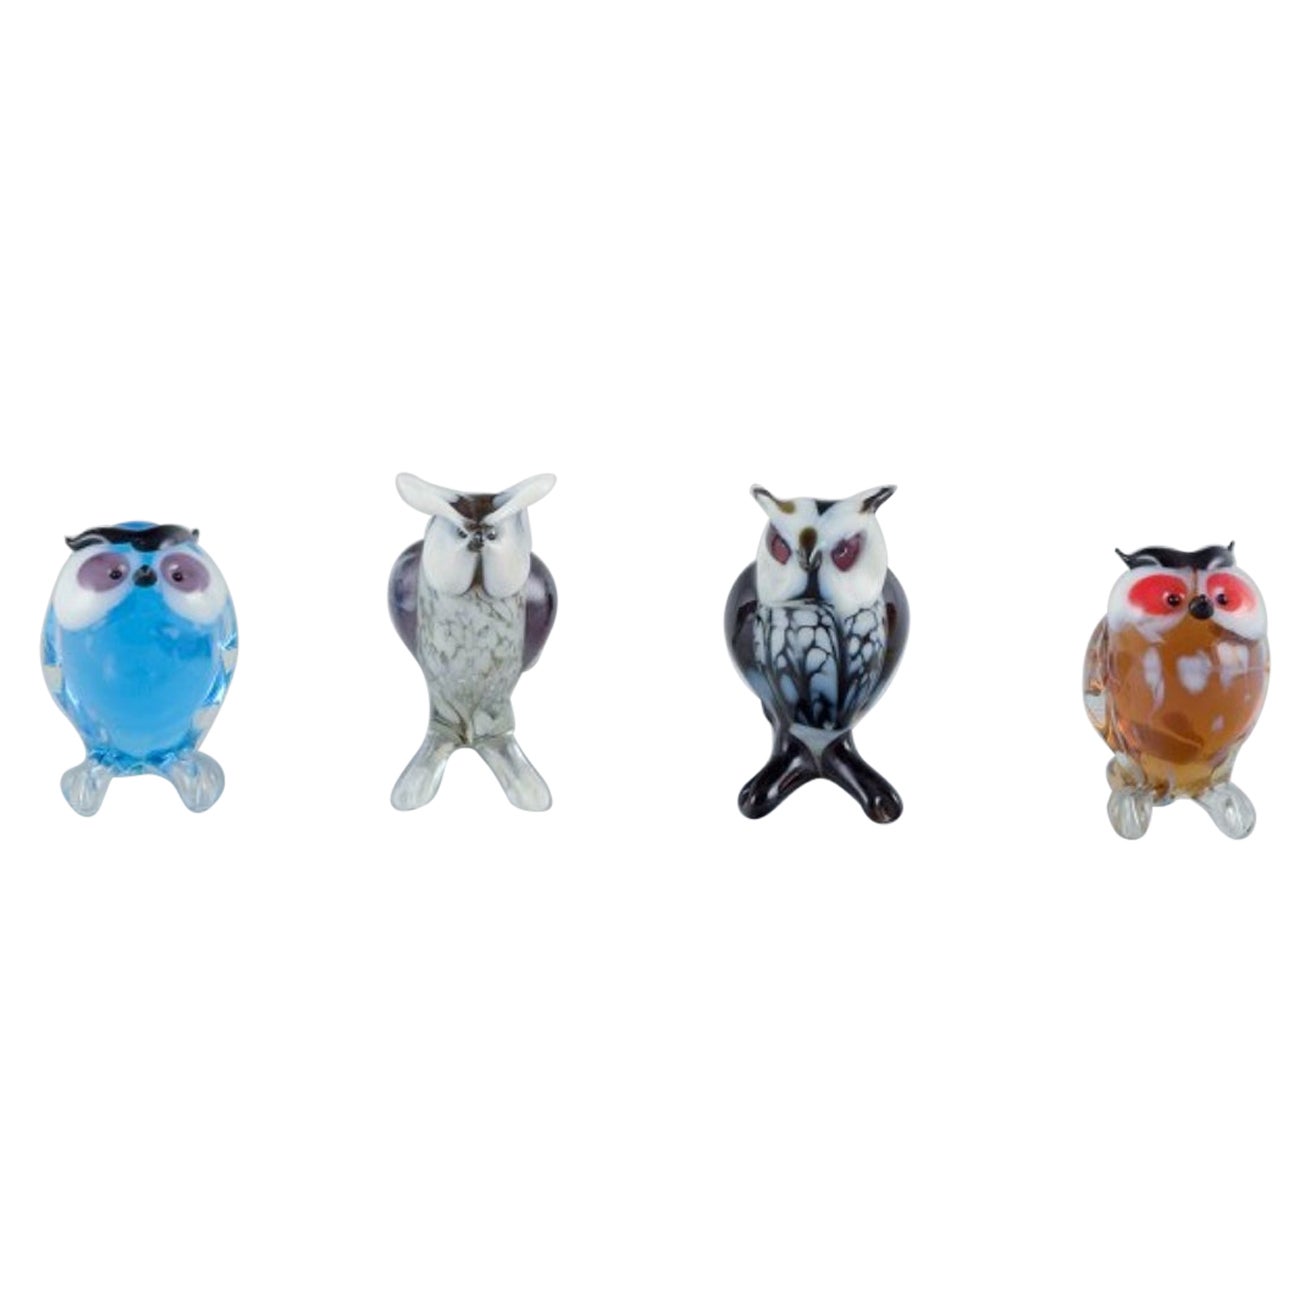 Murano, Italie. The Collective of four miniature glass figurines of owls. en vente